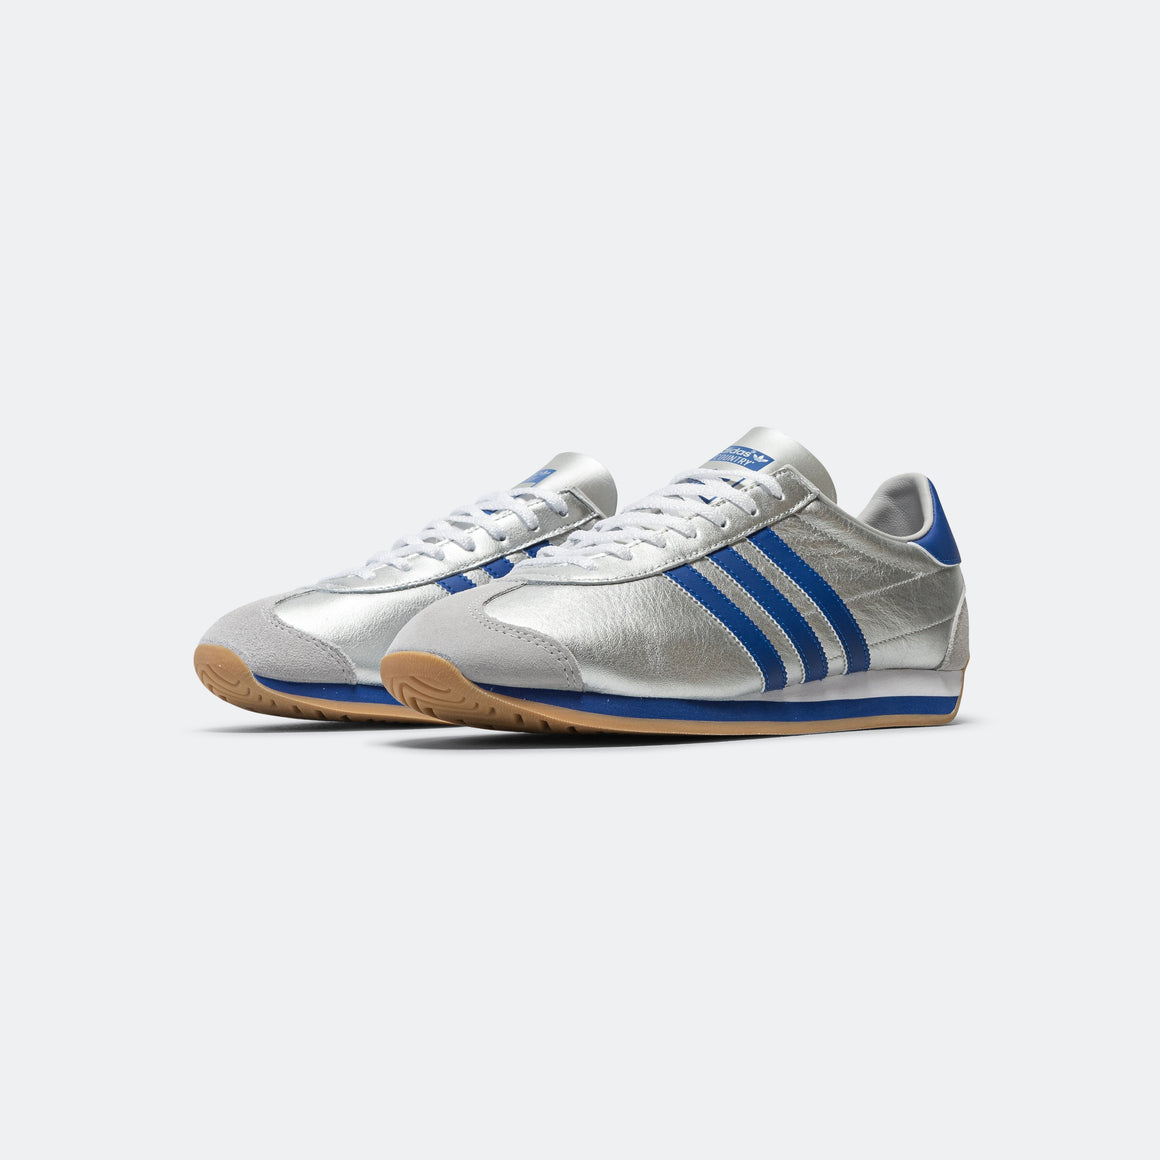 Country OG - Metallic Silver/Bright Blue-Footwear White